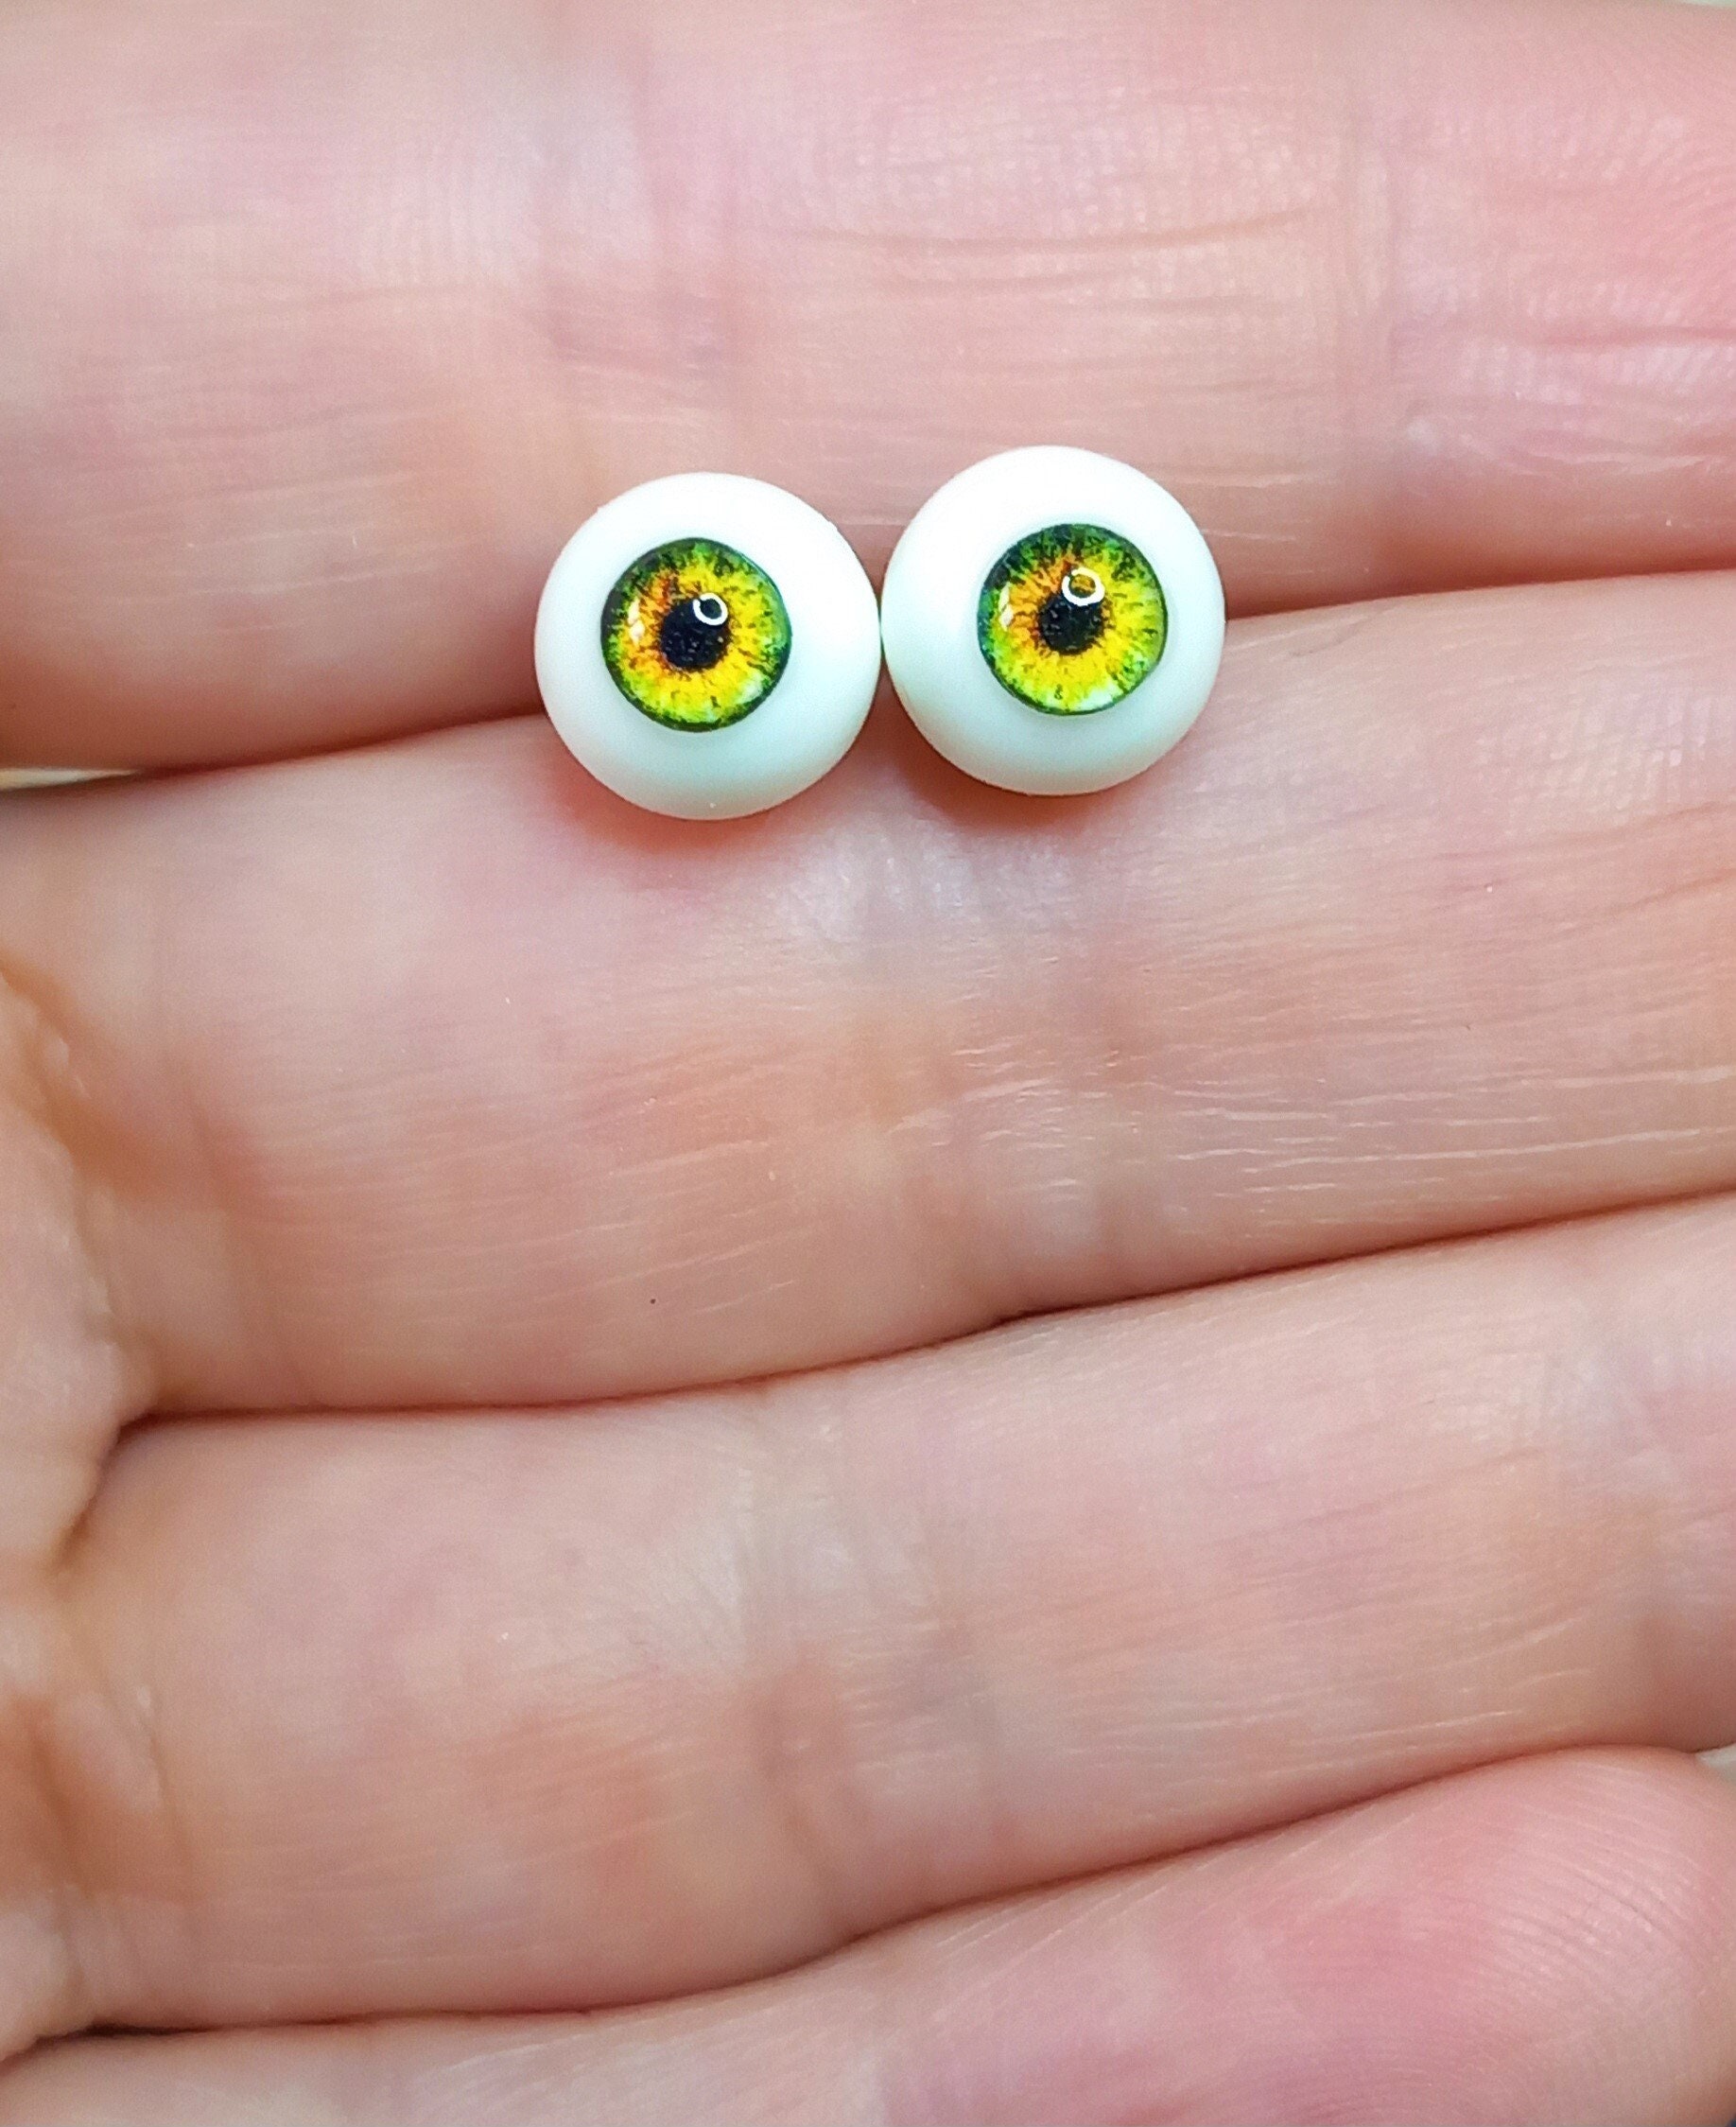 7 PAIR Plastic Oval Doll EYES 5mm IRIS Overall Size 7mm by 9mm for Doll,  Puppet, Troll, Fairy, Fantasy Art, Crafts, Jewelry Design A-1 